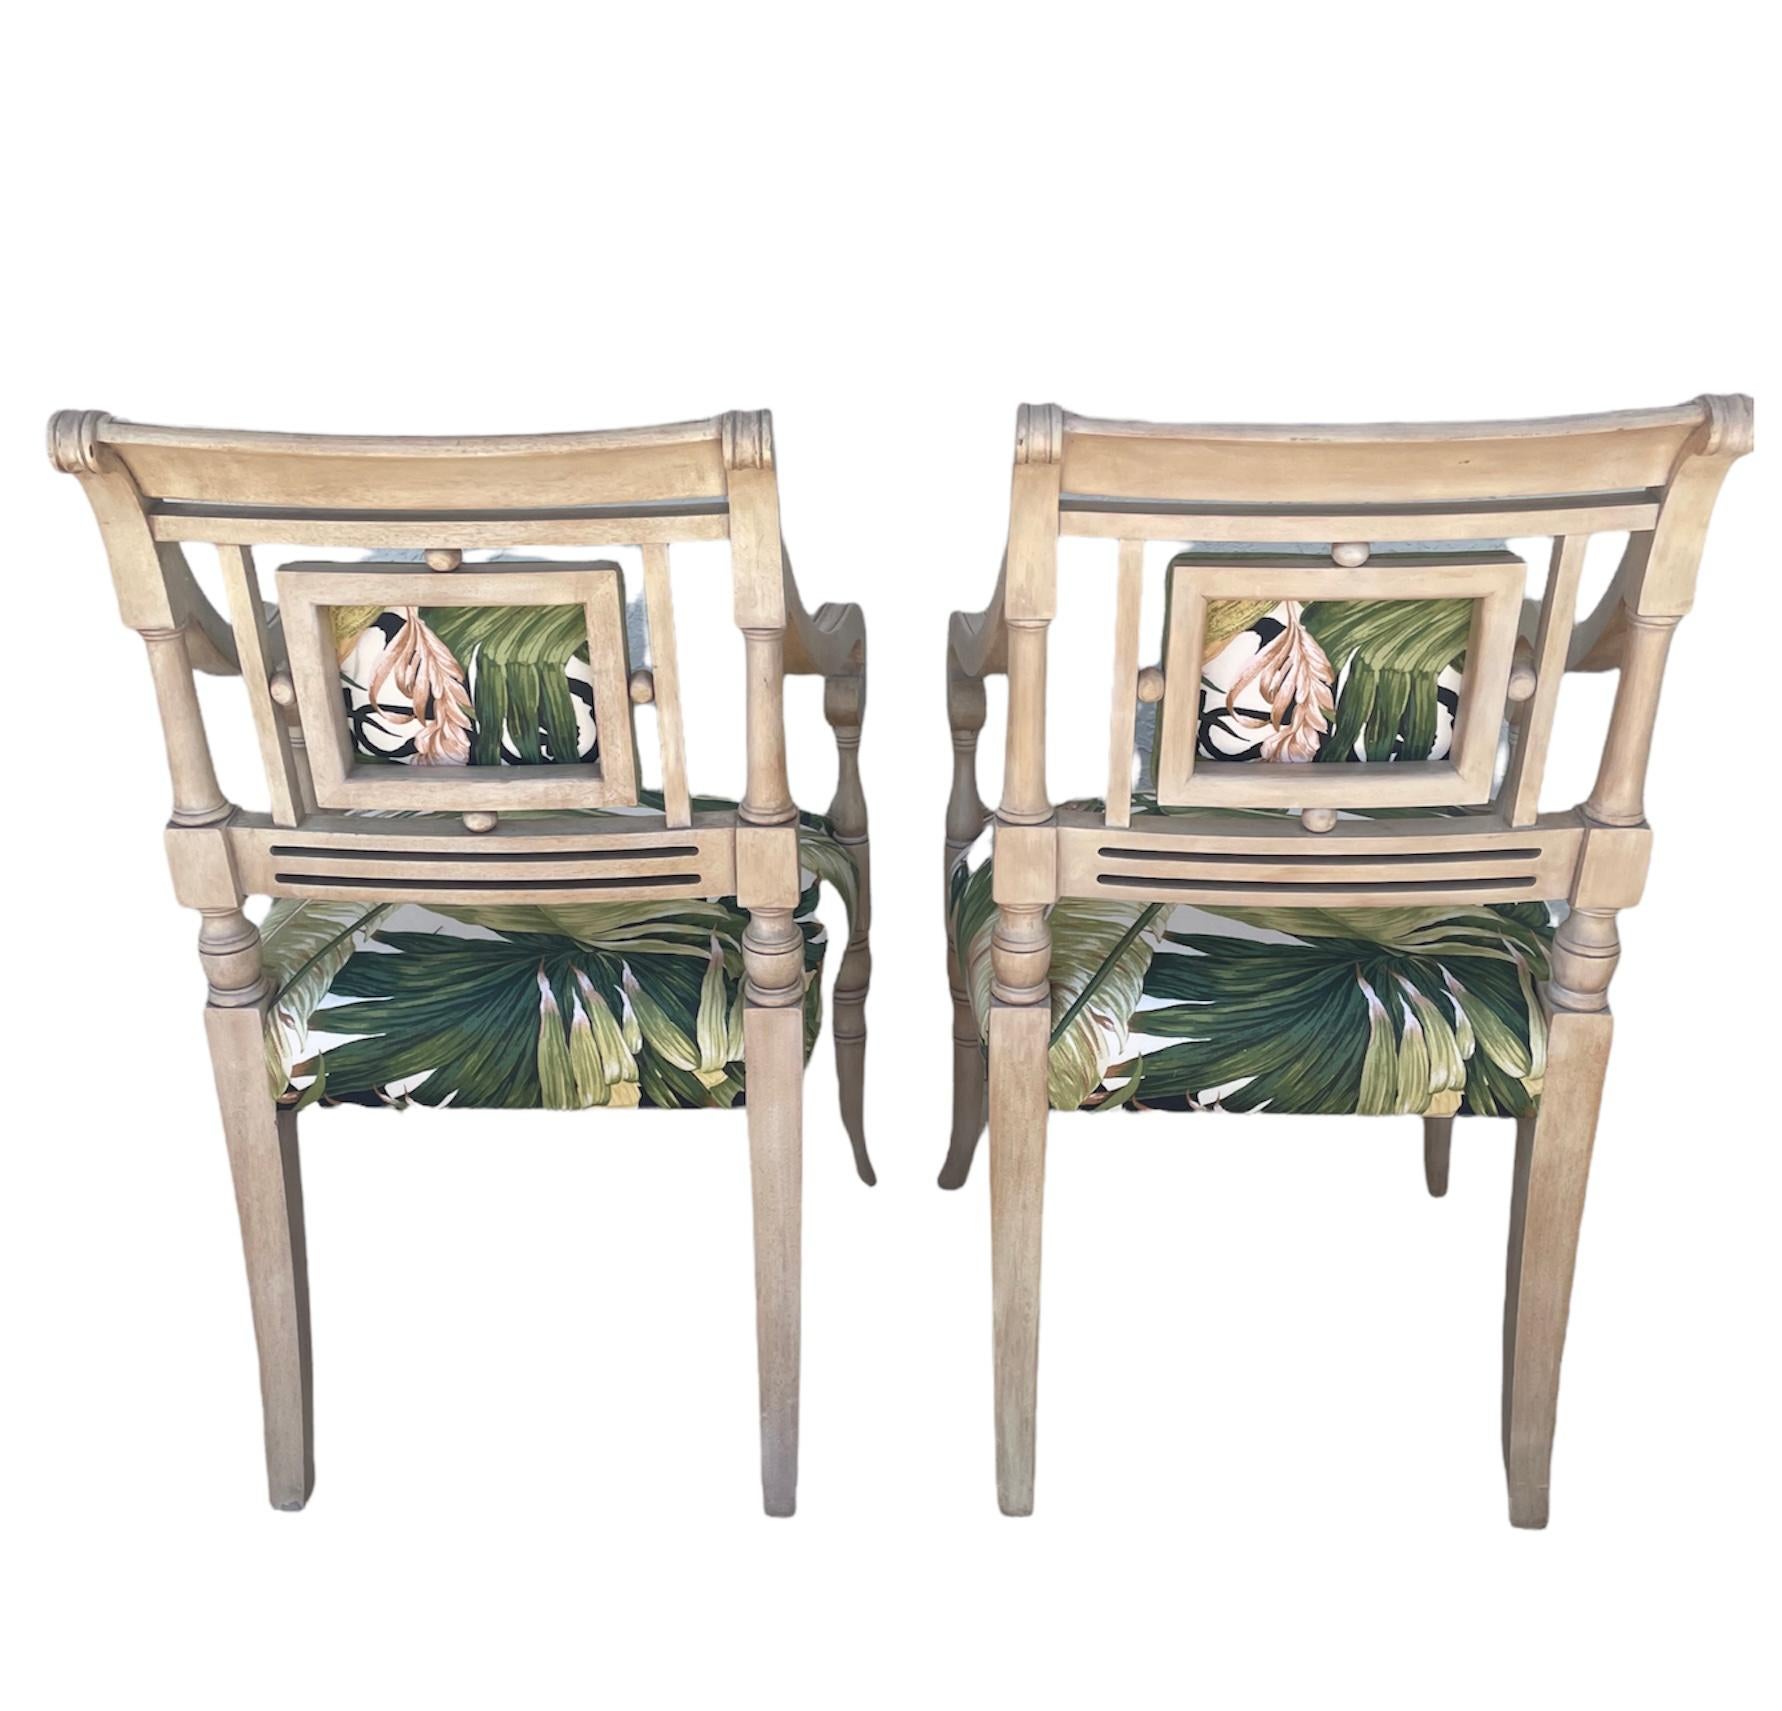 Regency Palm Beach Styled Arm Chairs with Carved, Plaid Legs